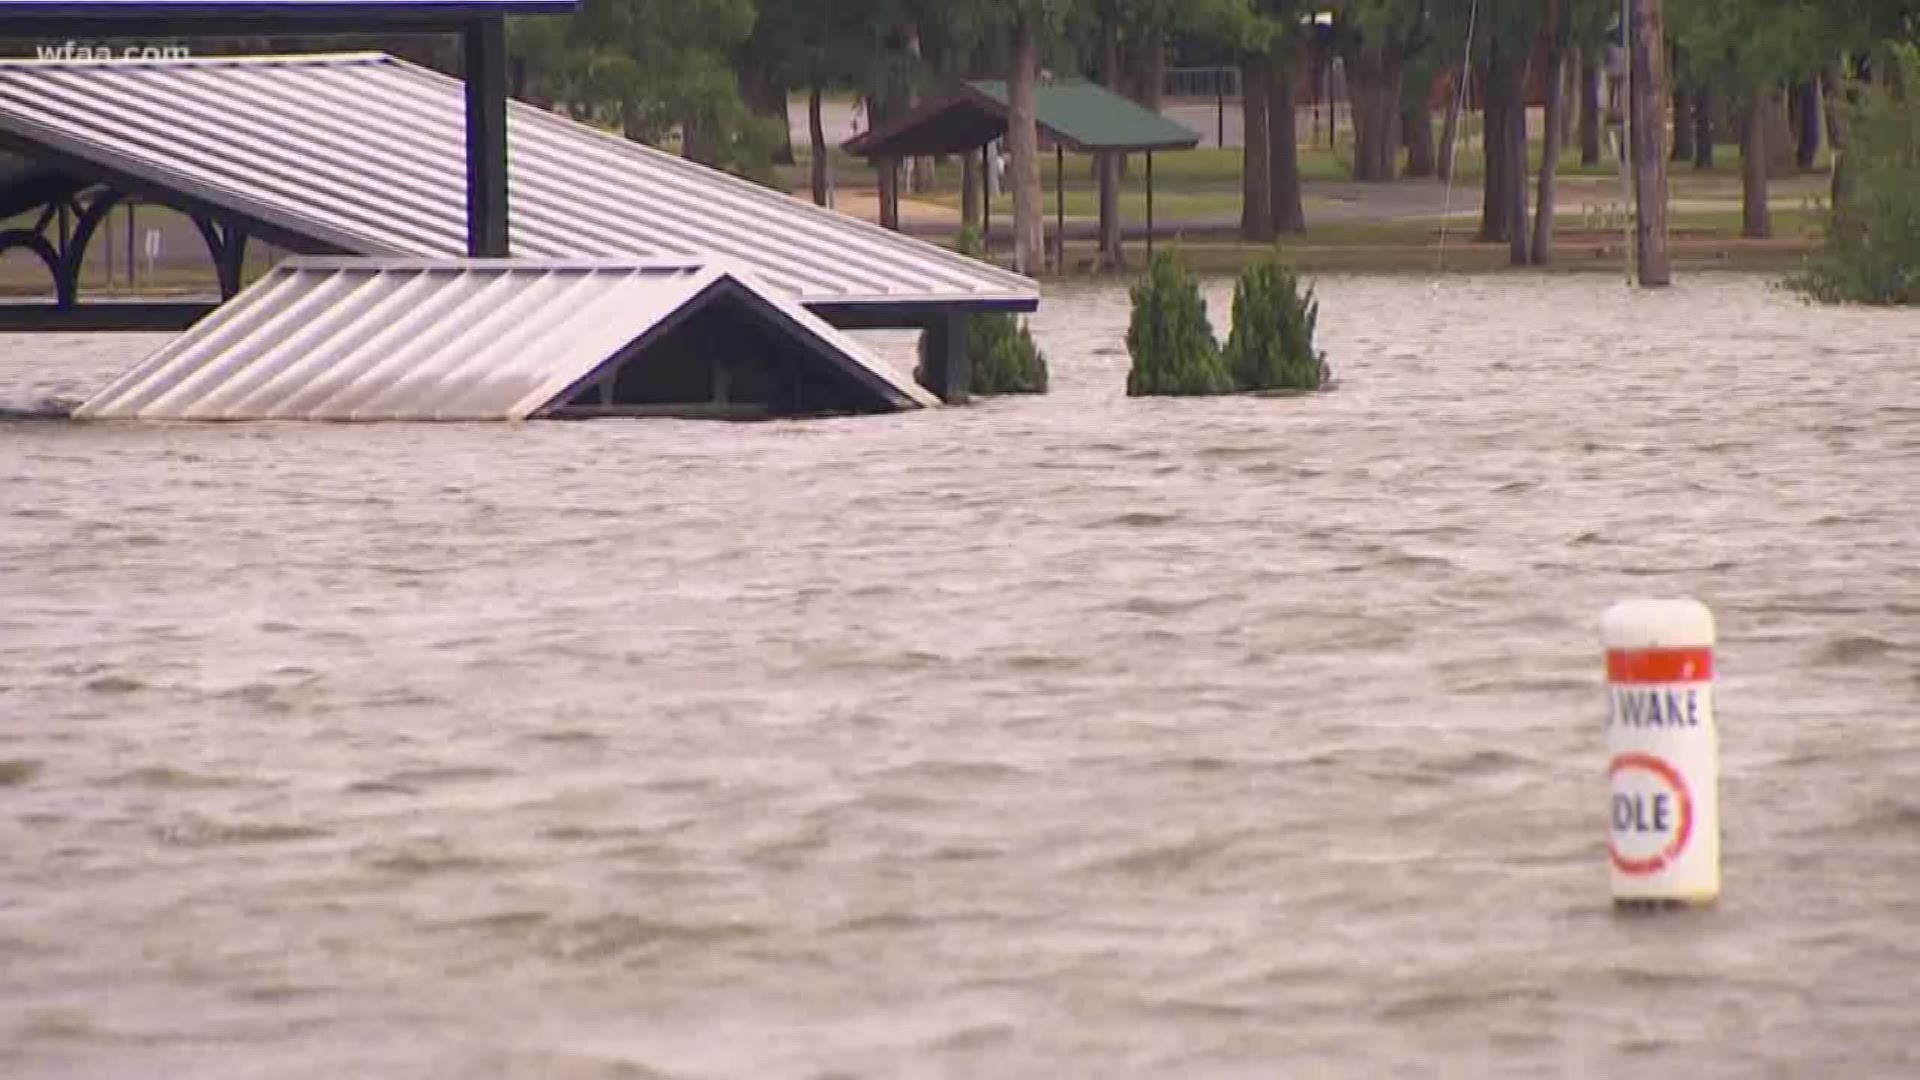 High waters at North Texas lakes lead to closures and warnings to stay out of the water.